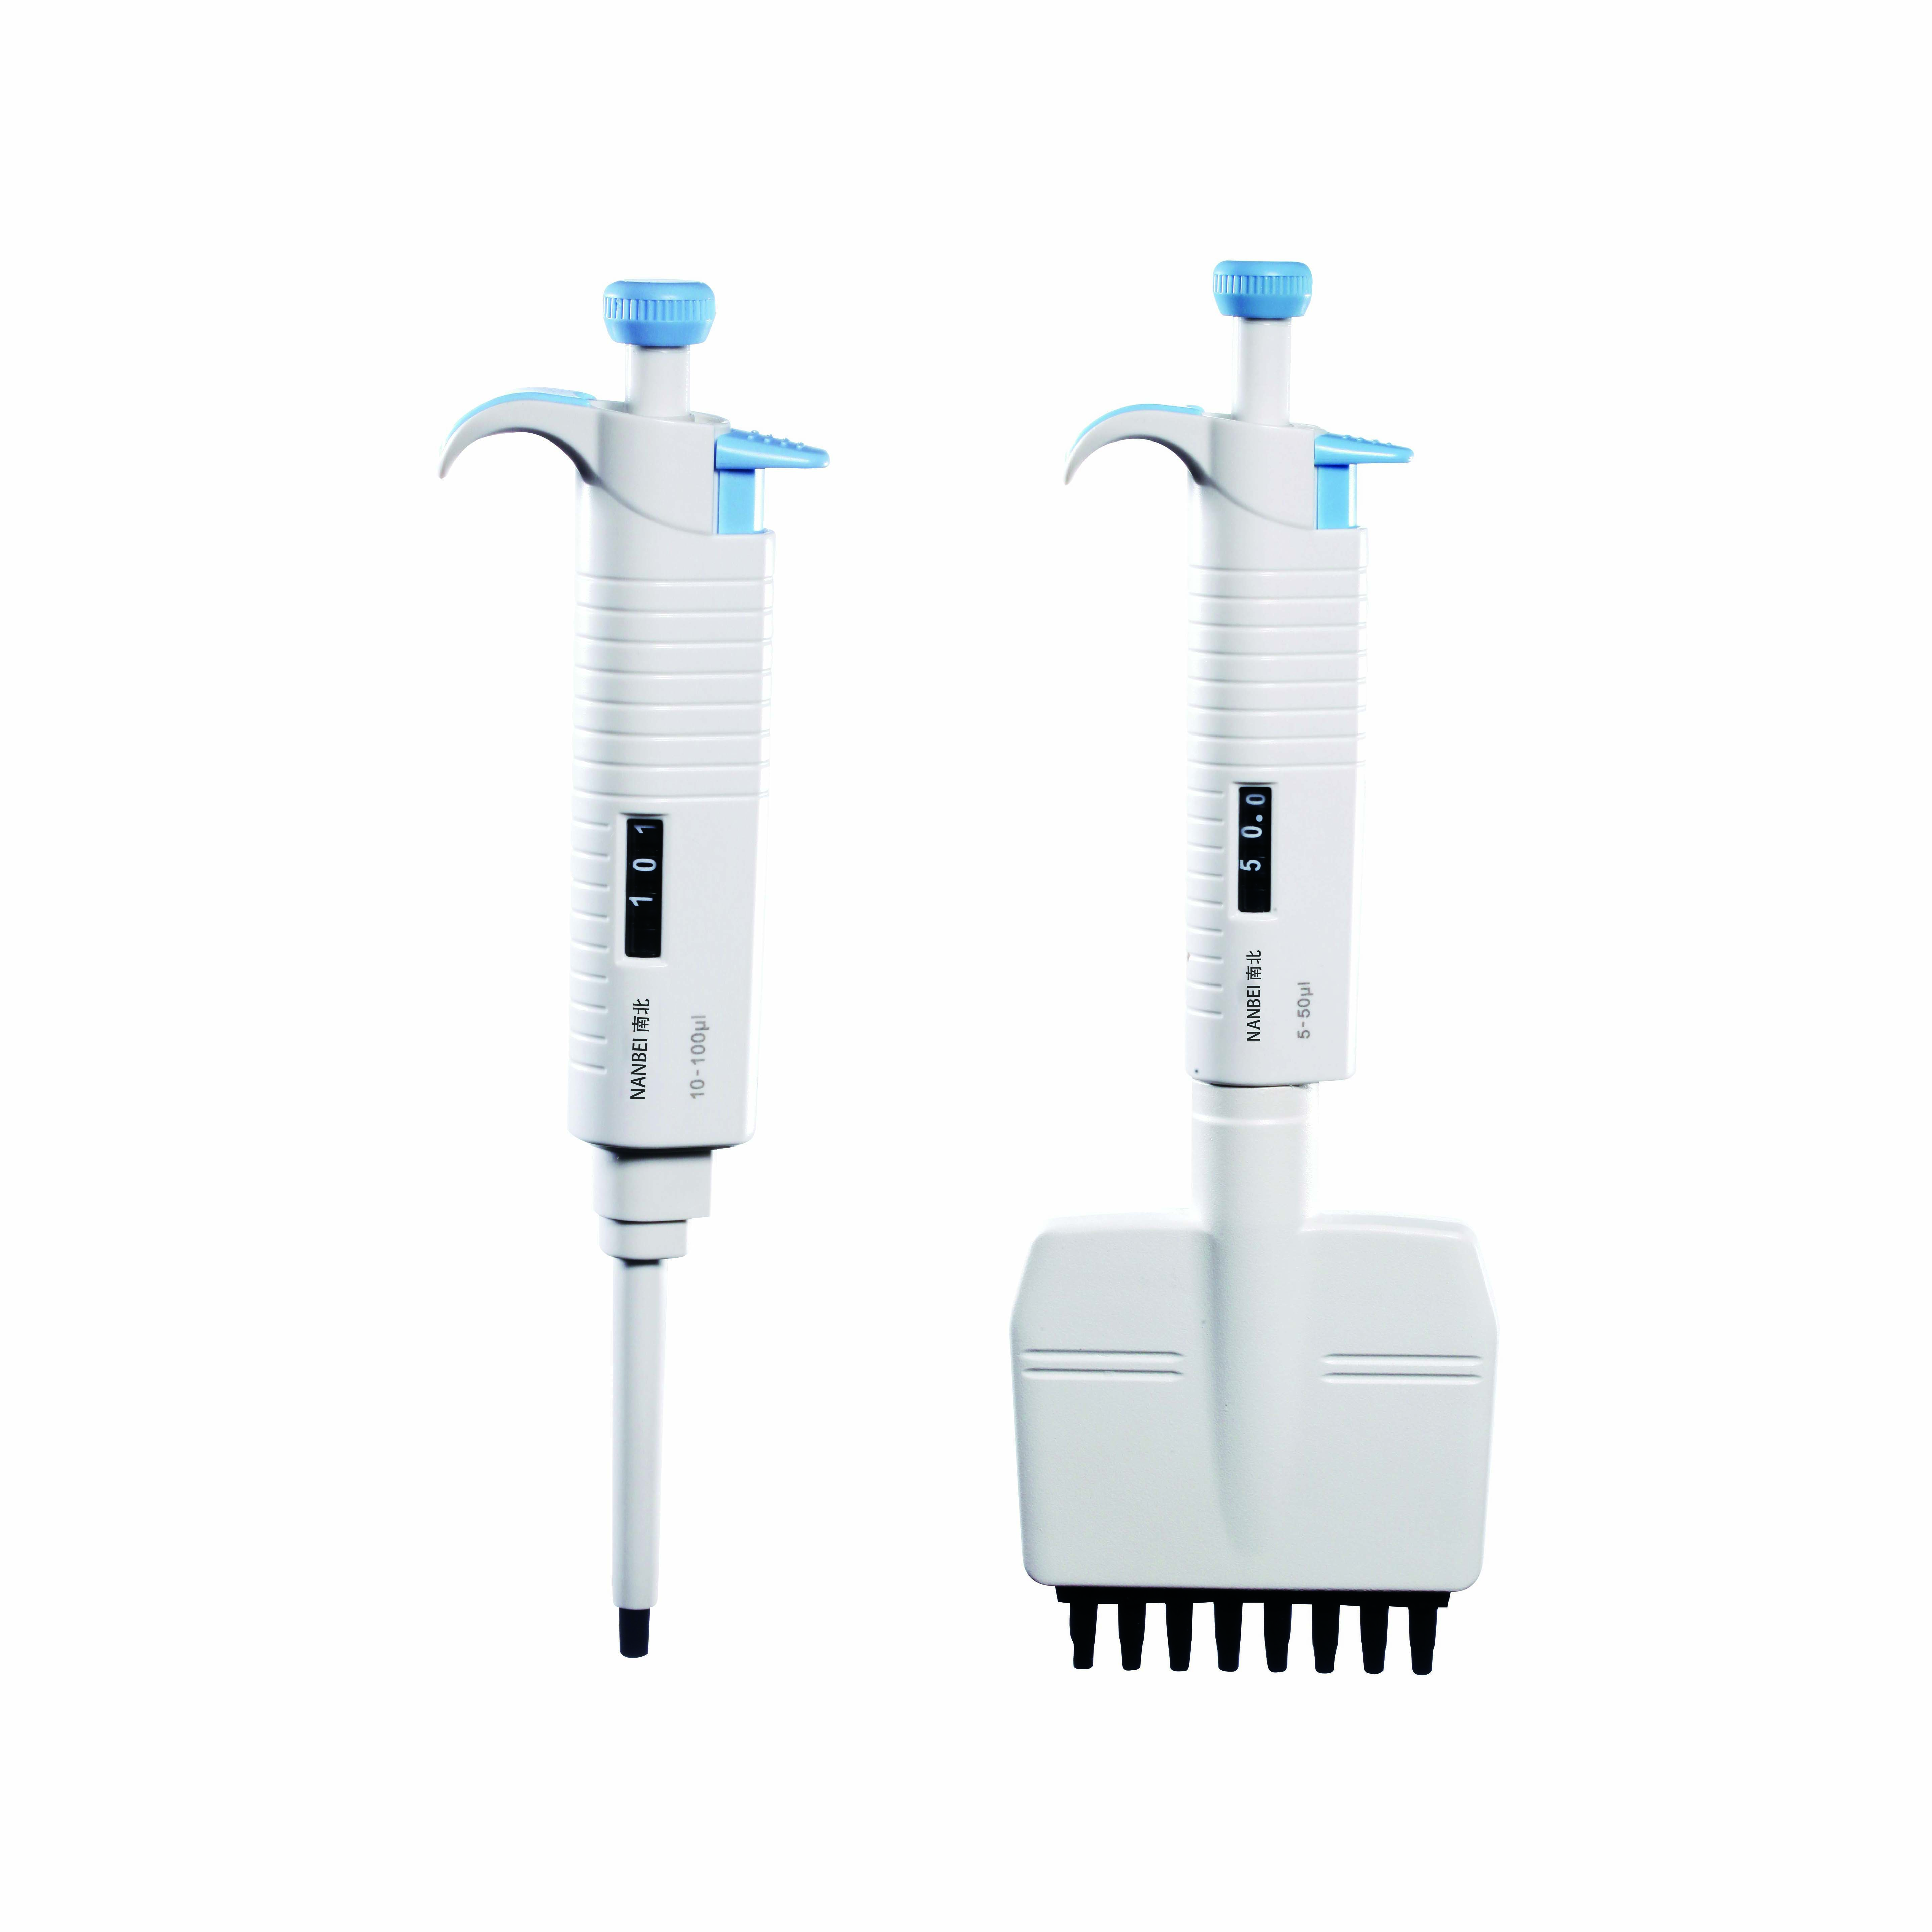 Plus Autoclavable Pipette (Adjustable and Fixed Volume)